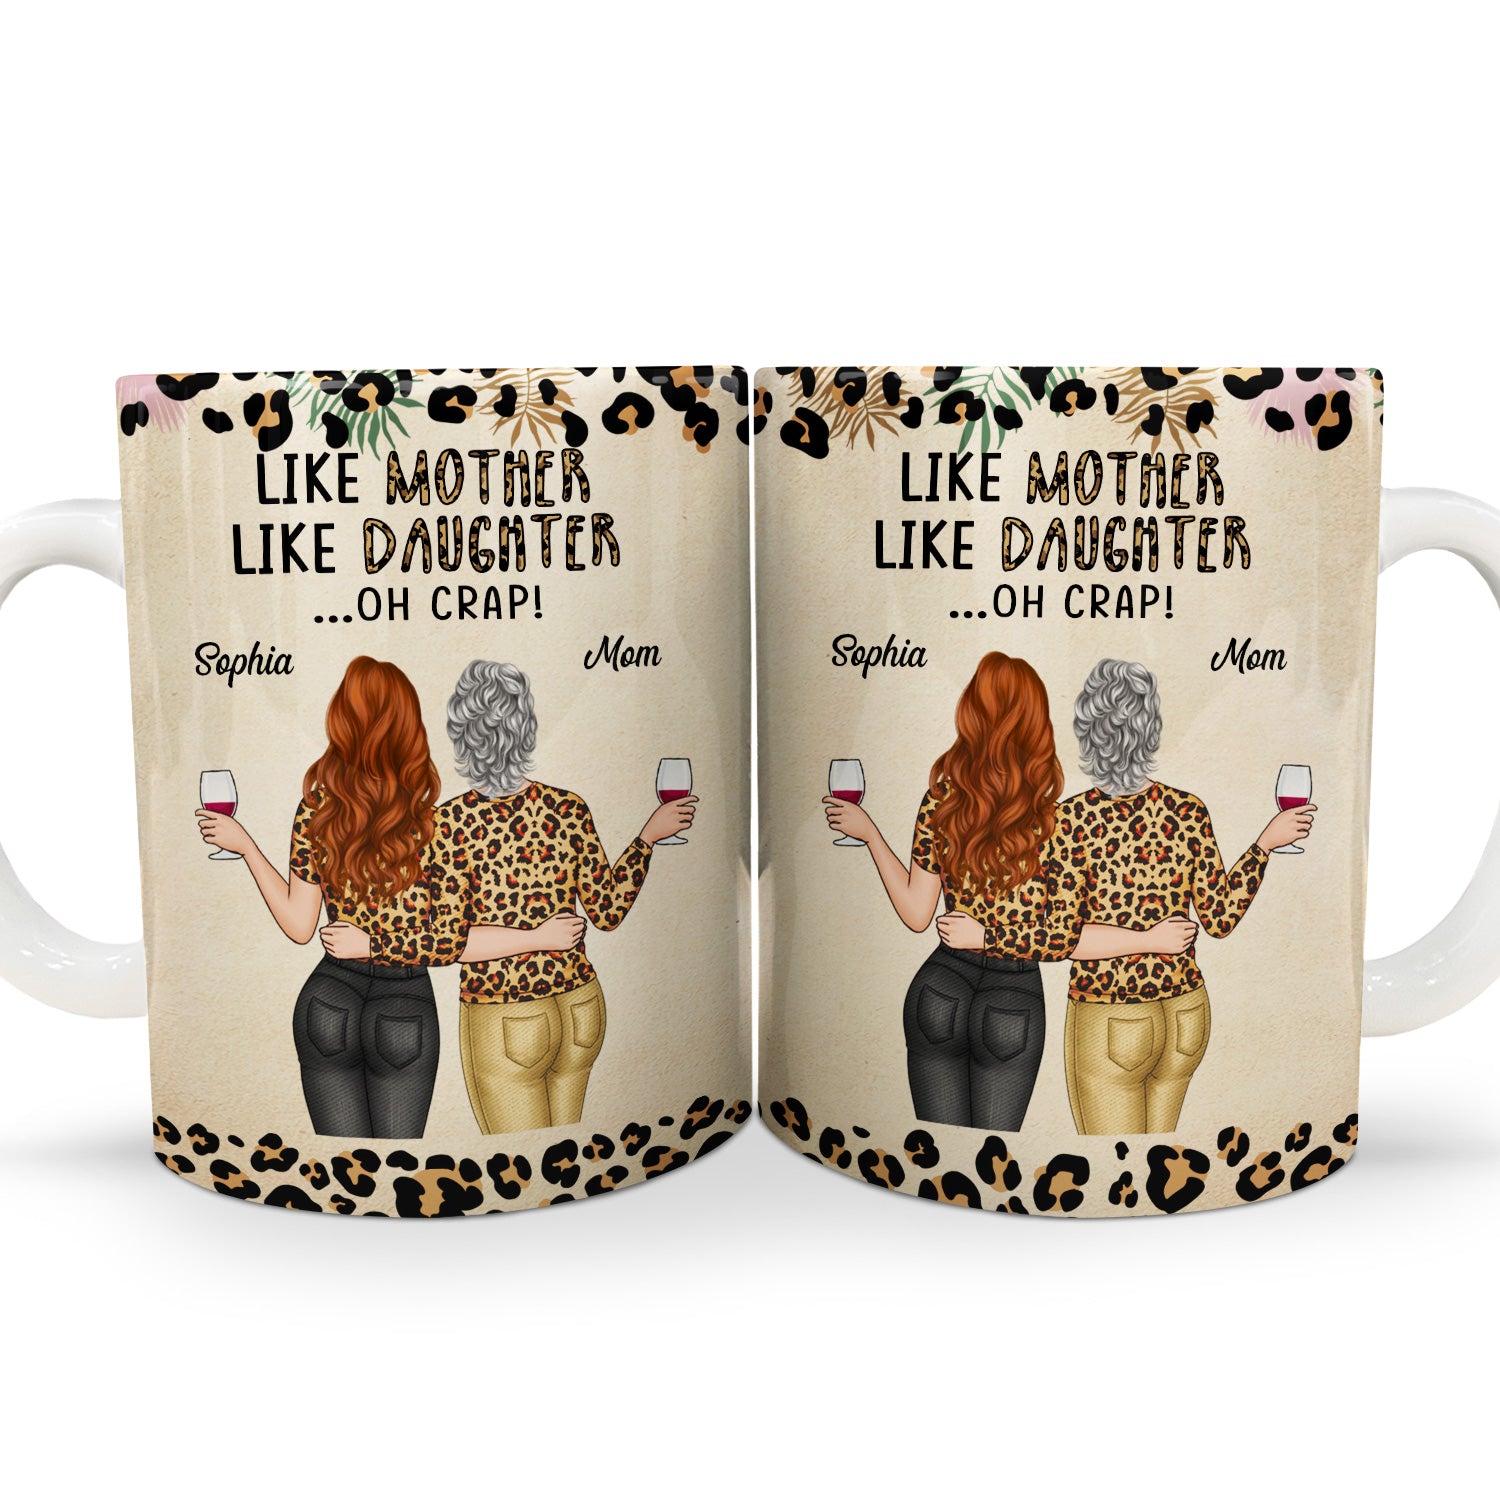 Like Mother Like Daughter - Gift For Mom, Mother, Grandma, Daughter - Personalized White Edge-to-Edge Mug